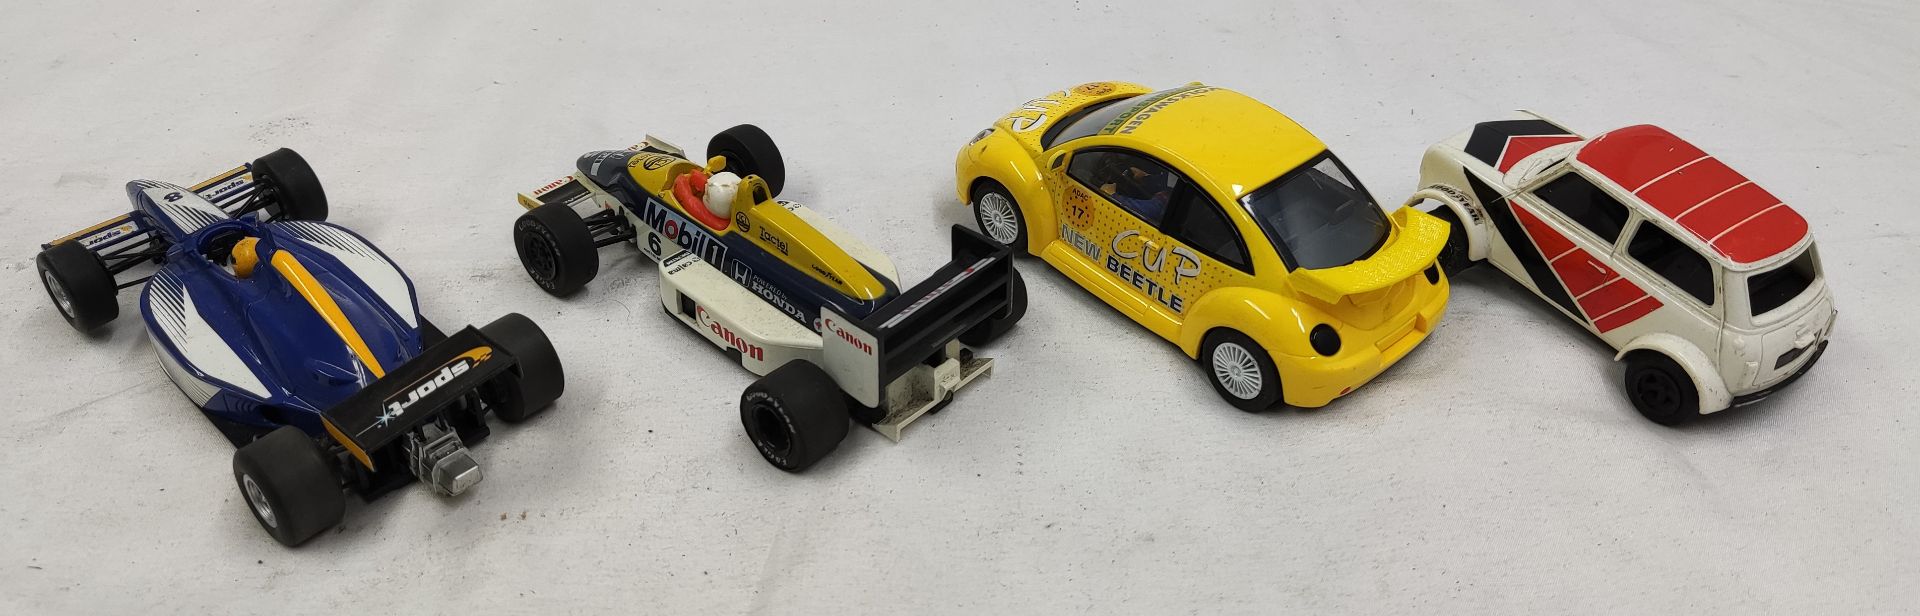 4 x Scalextric Cars Including VW Beetle, F1 Car, Open Wheeler and Mini Clubman 1275GT - Tested and - Image 6 of 11